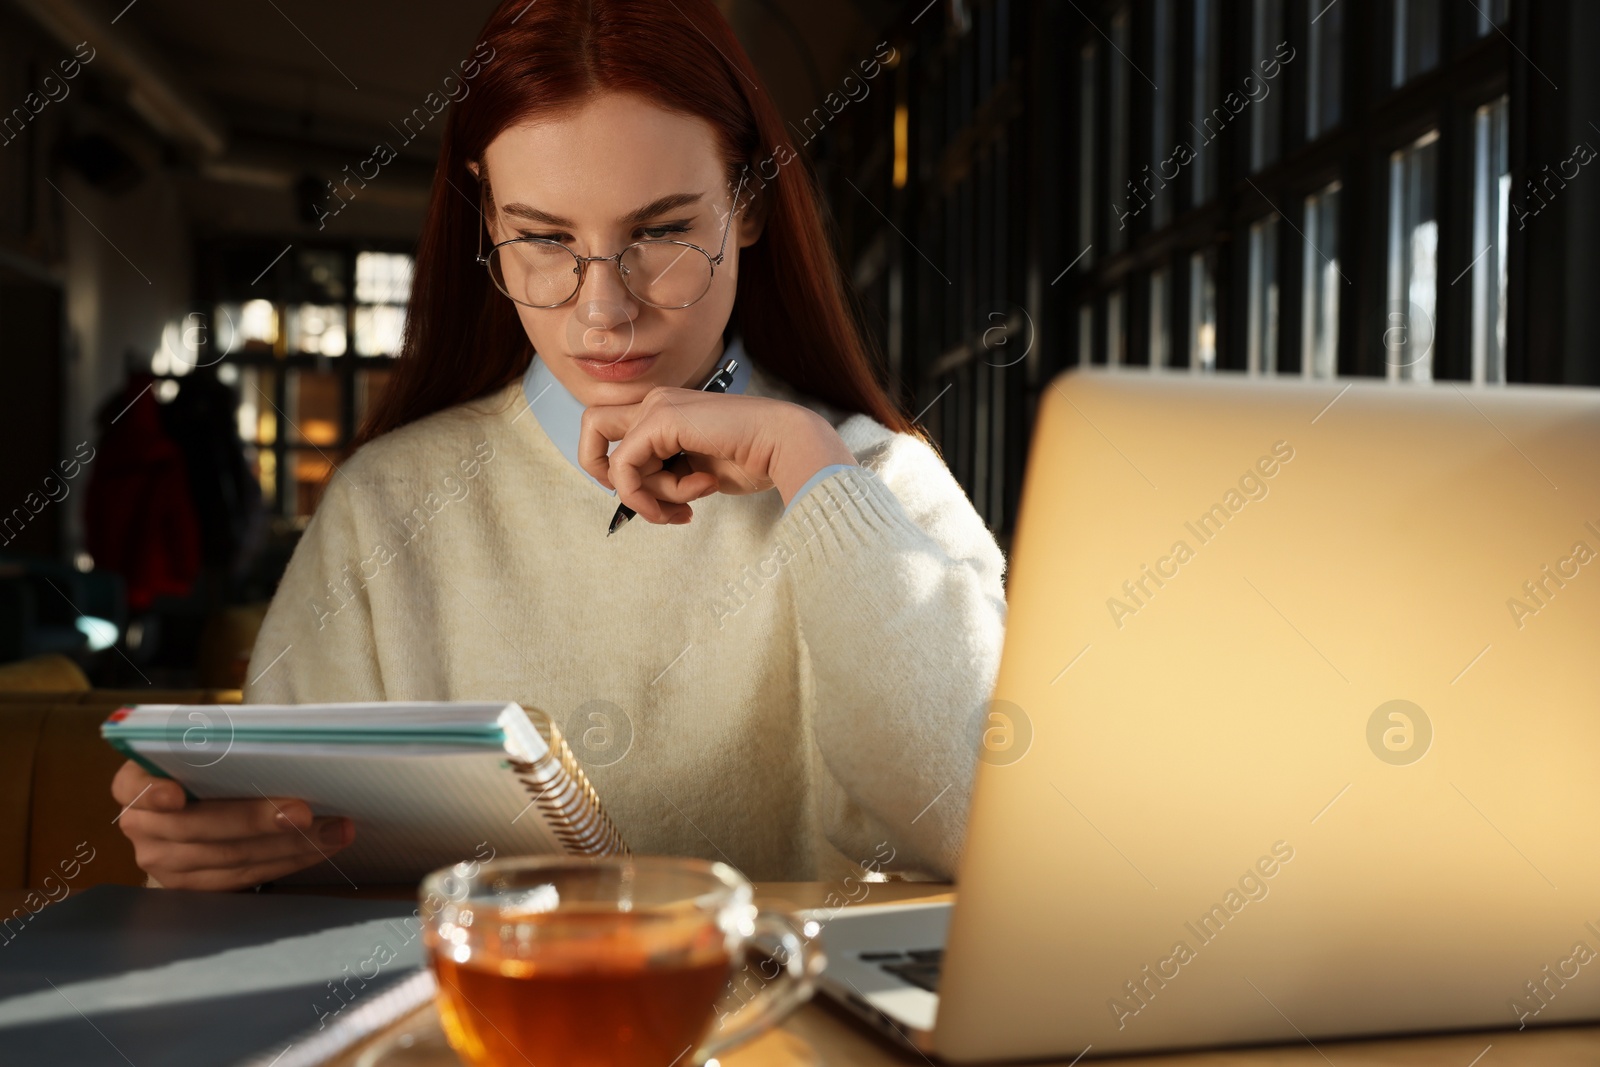 Photo of Young female student with laptop studying at table in cafe